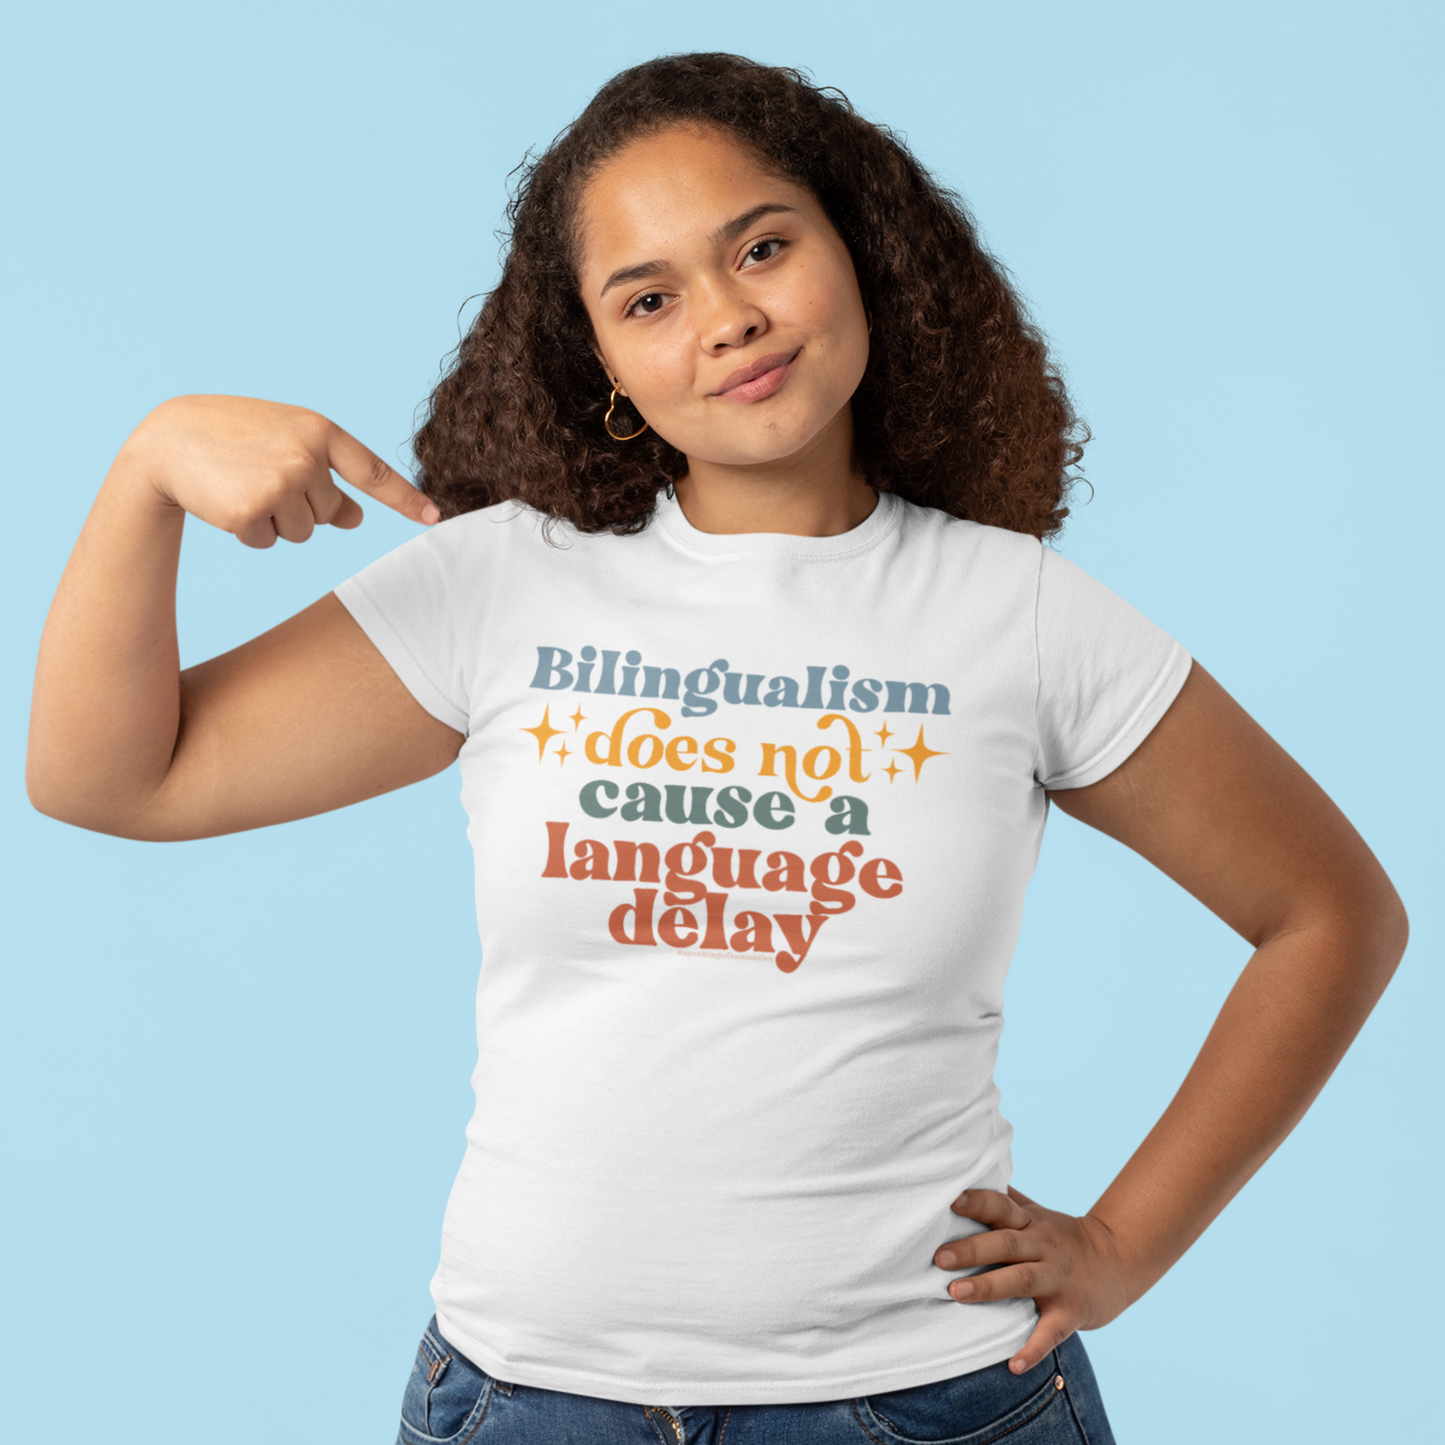 Bilingualism Does Not Cause a Language Delay Tee